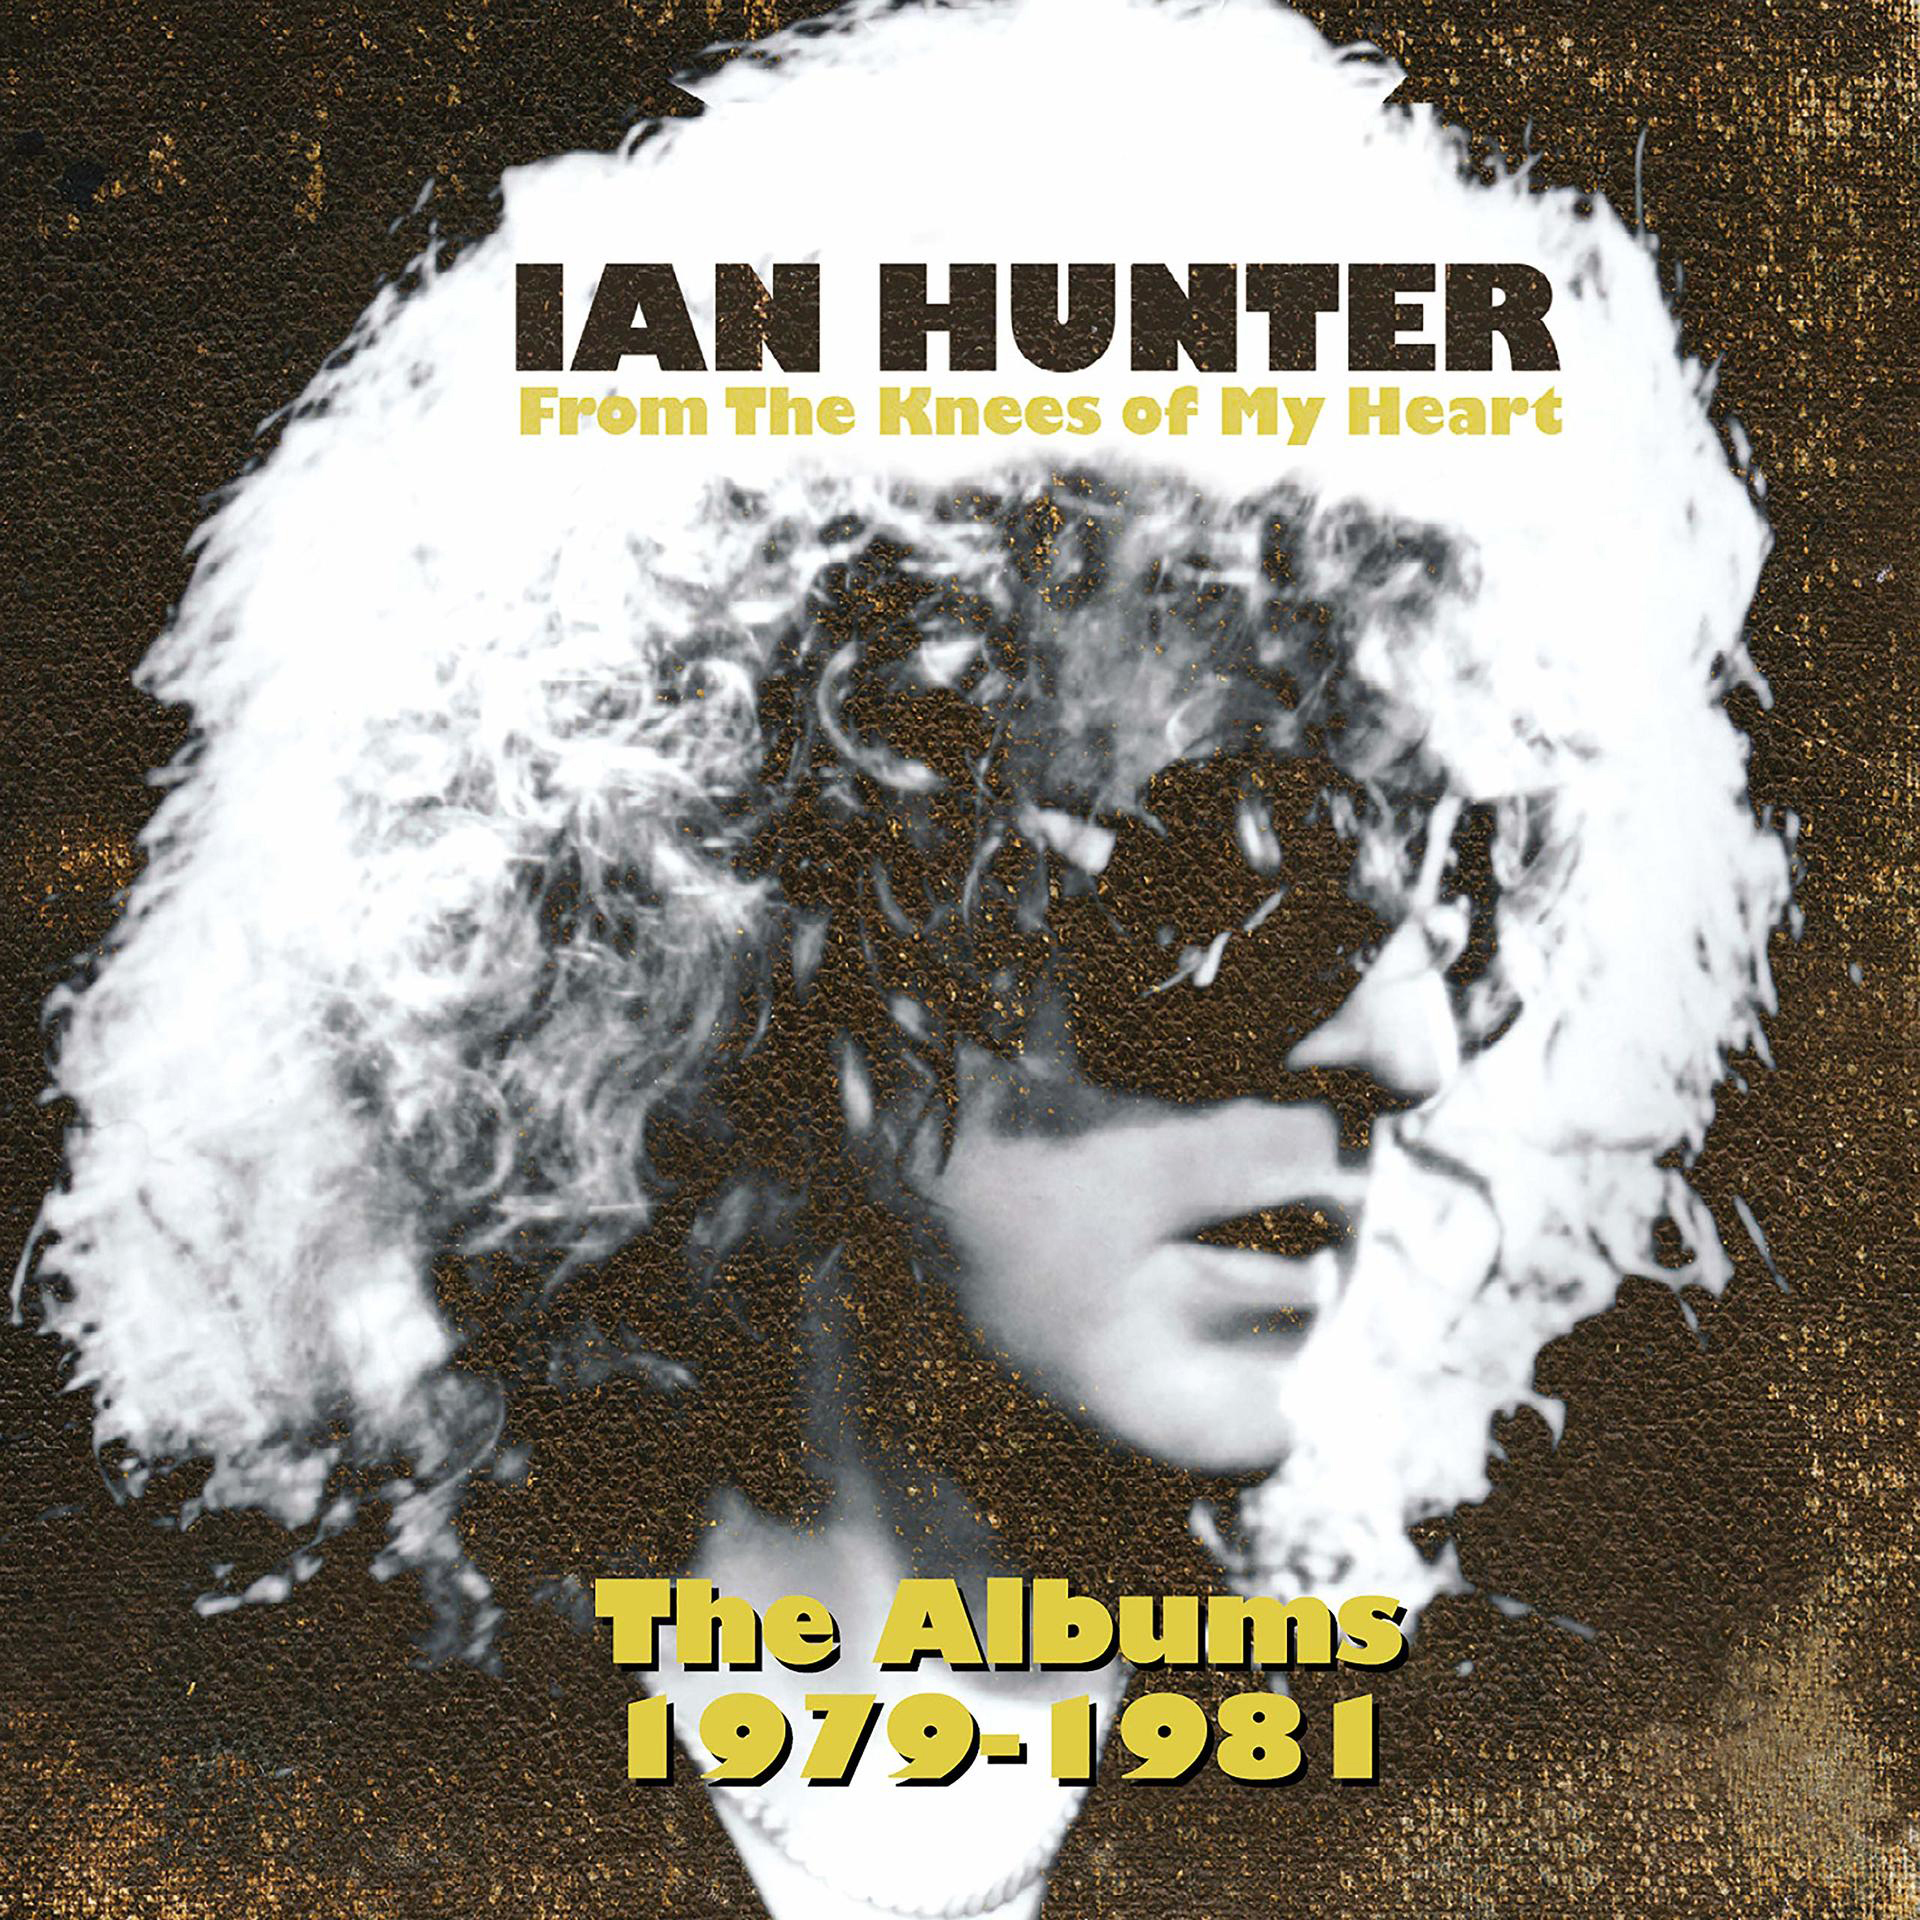 From Hunter Ian (CD) (The 1979-1981) Of Albums My - Knees Heart The -